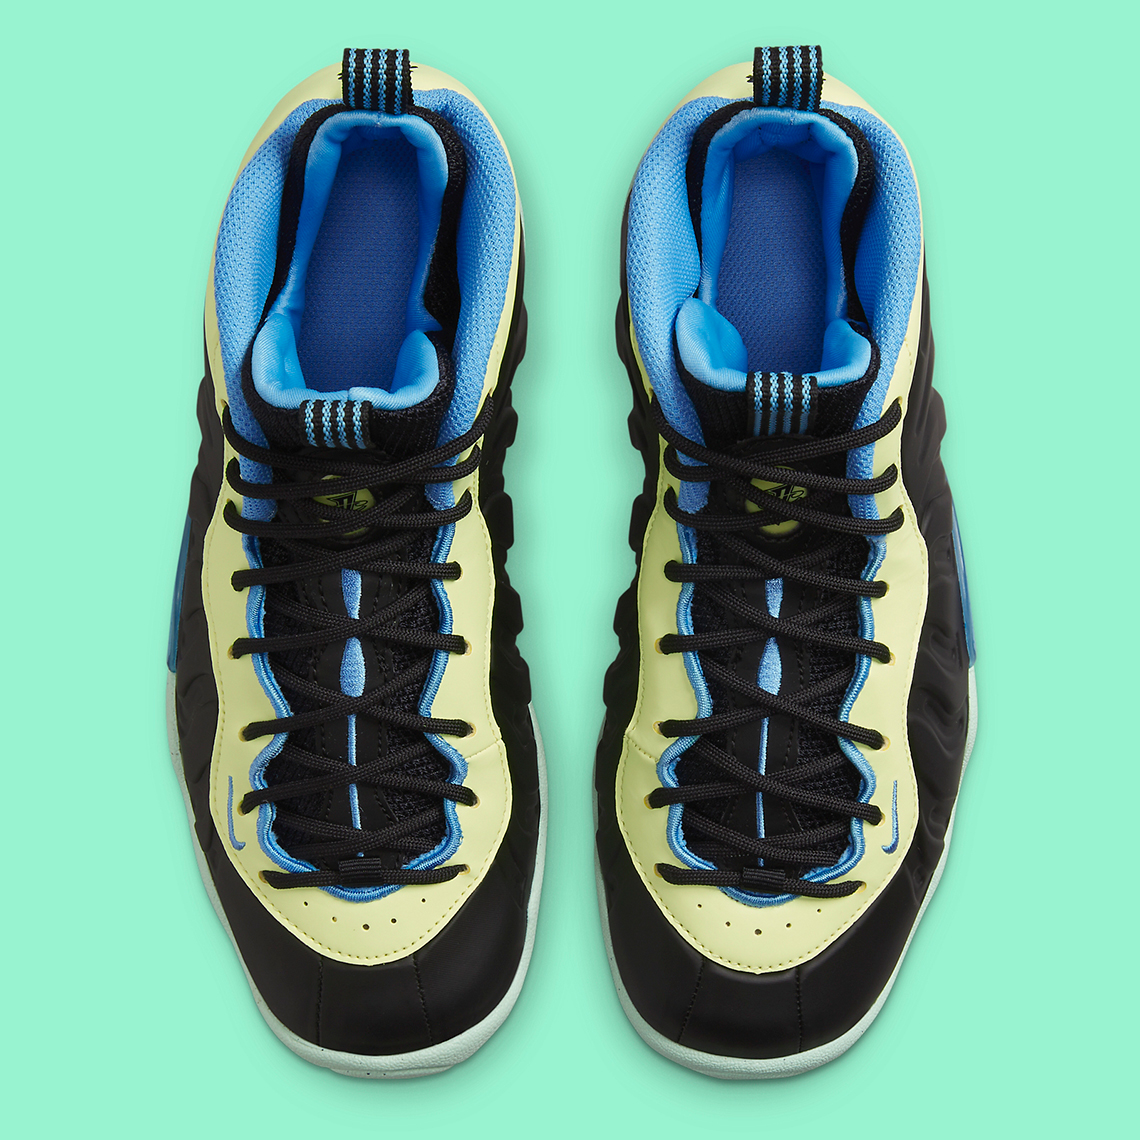 nike little posite one DH6490 001 release date 8